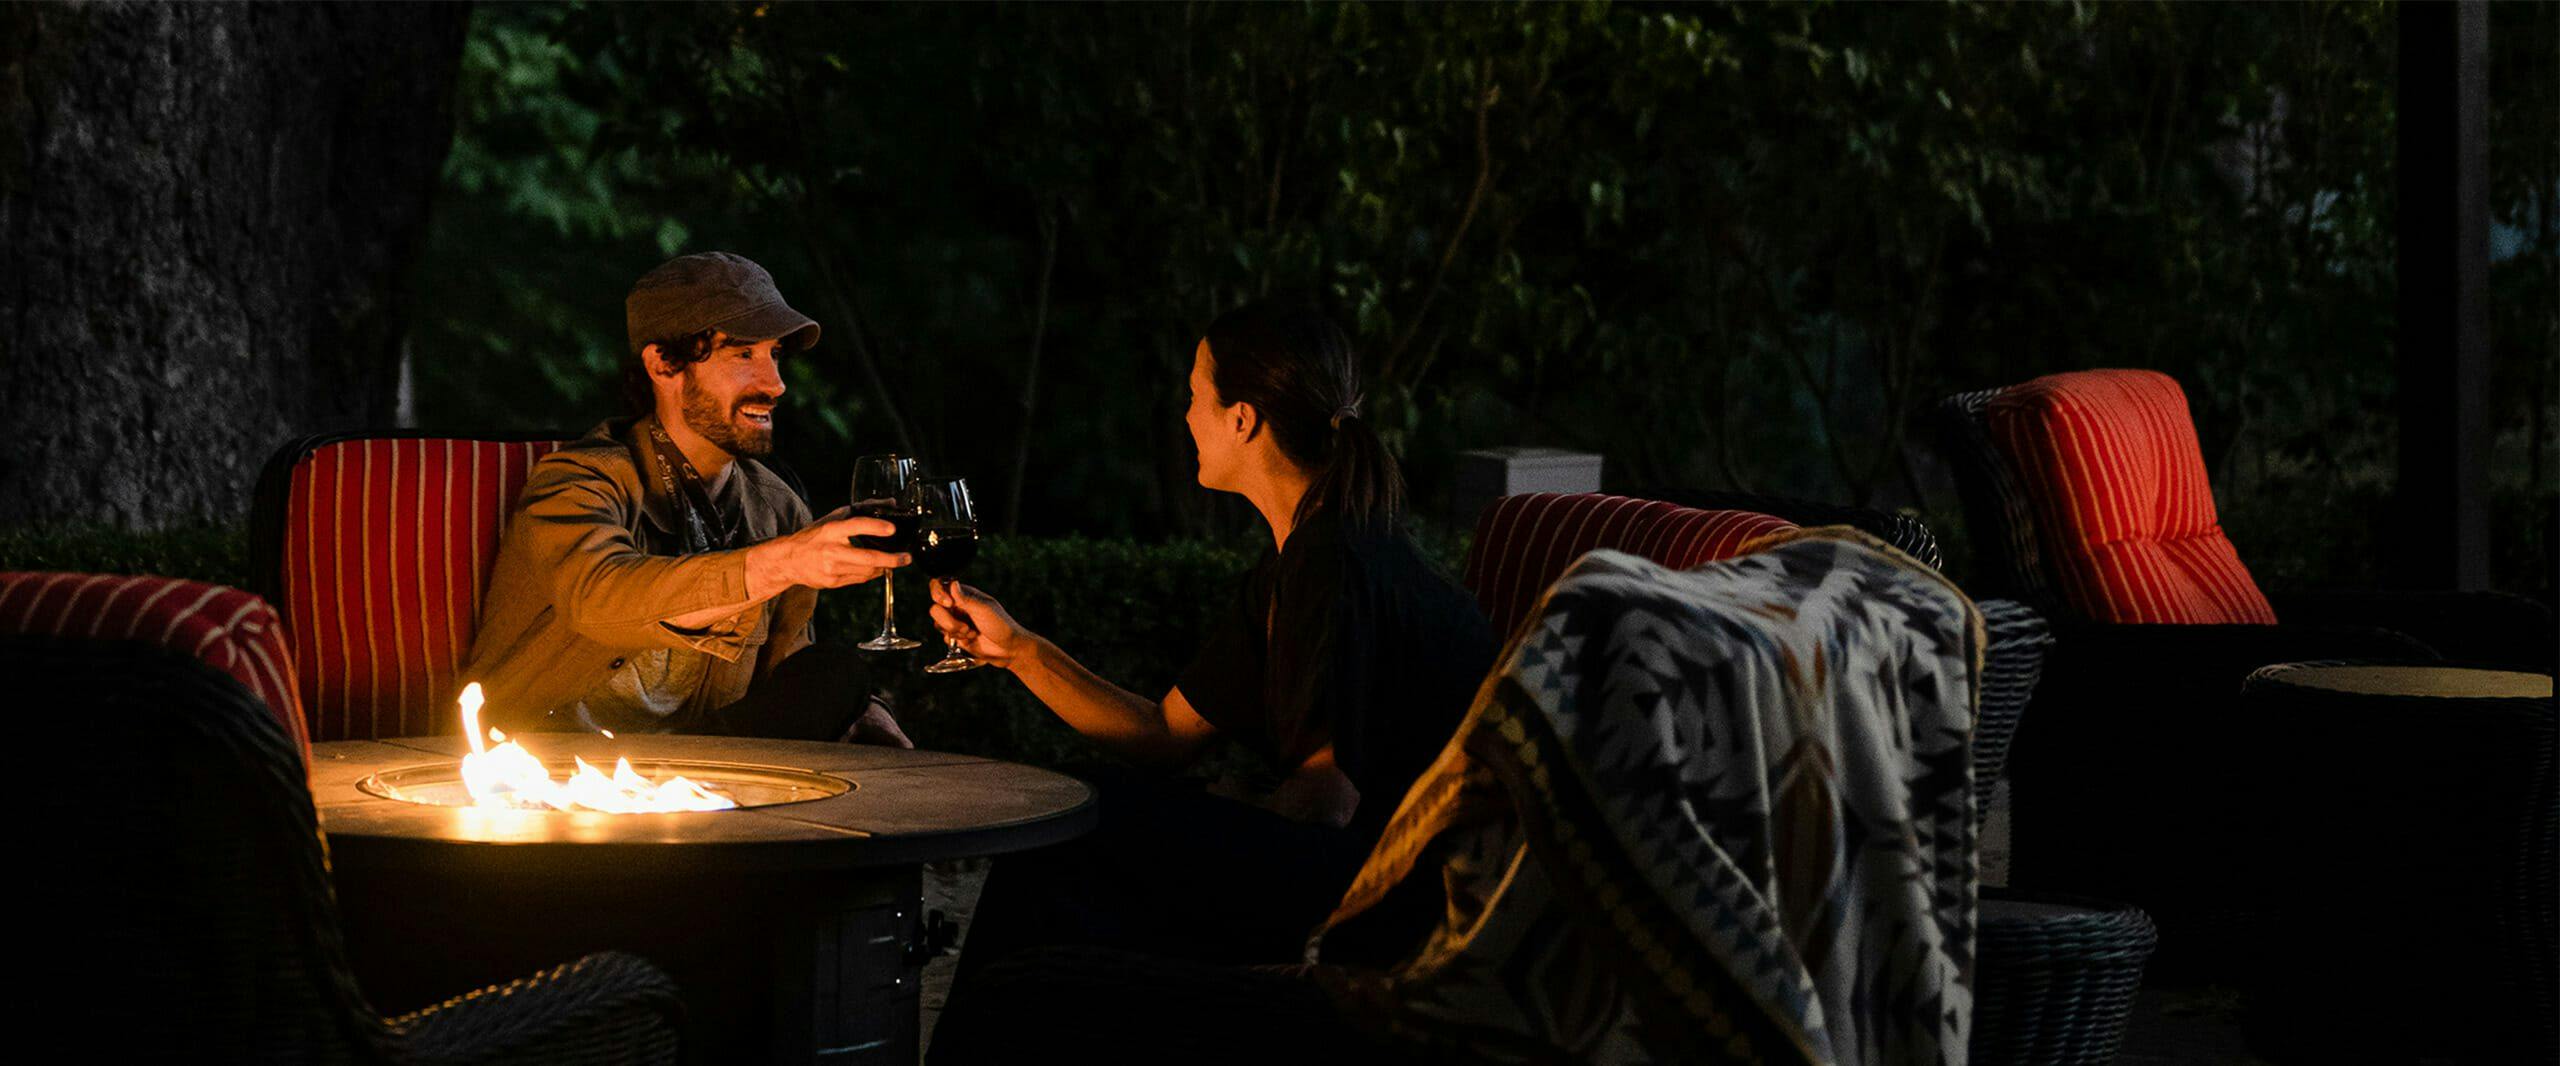 two people toasting wine over a fire pit outside